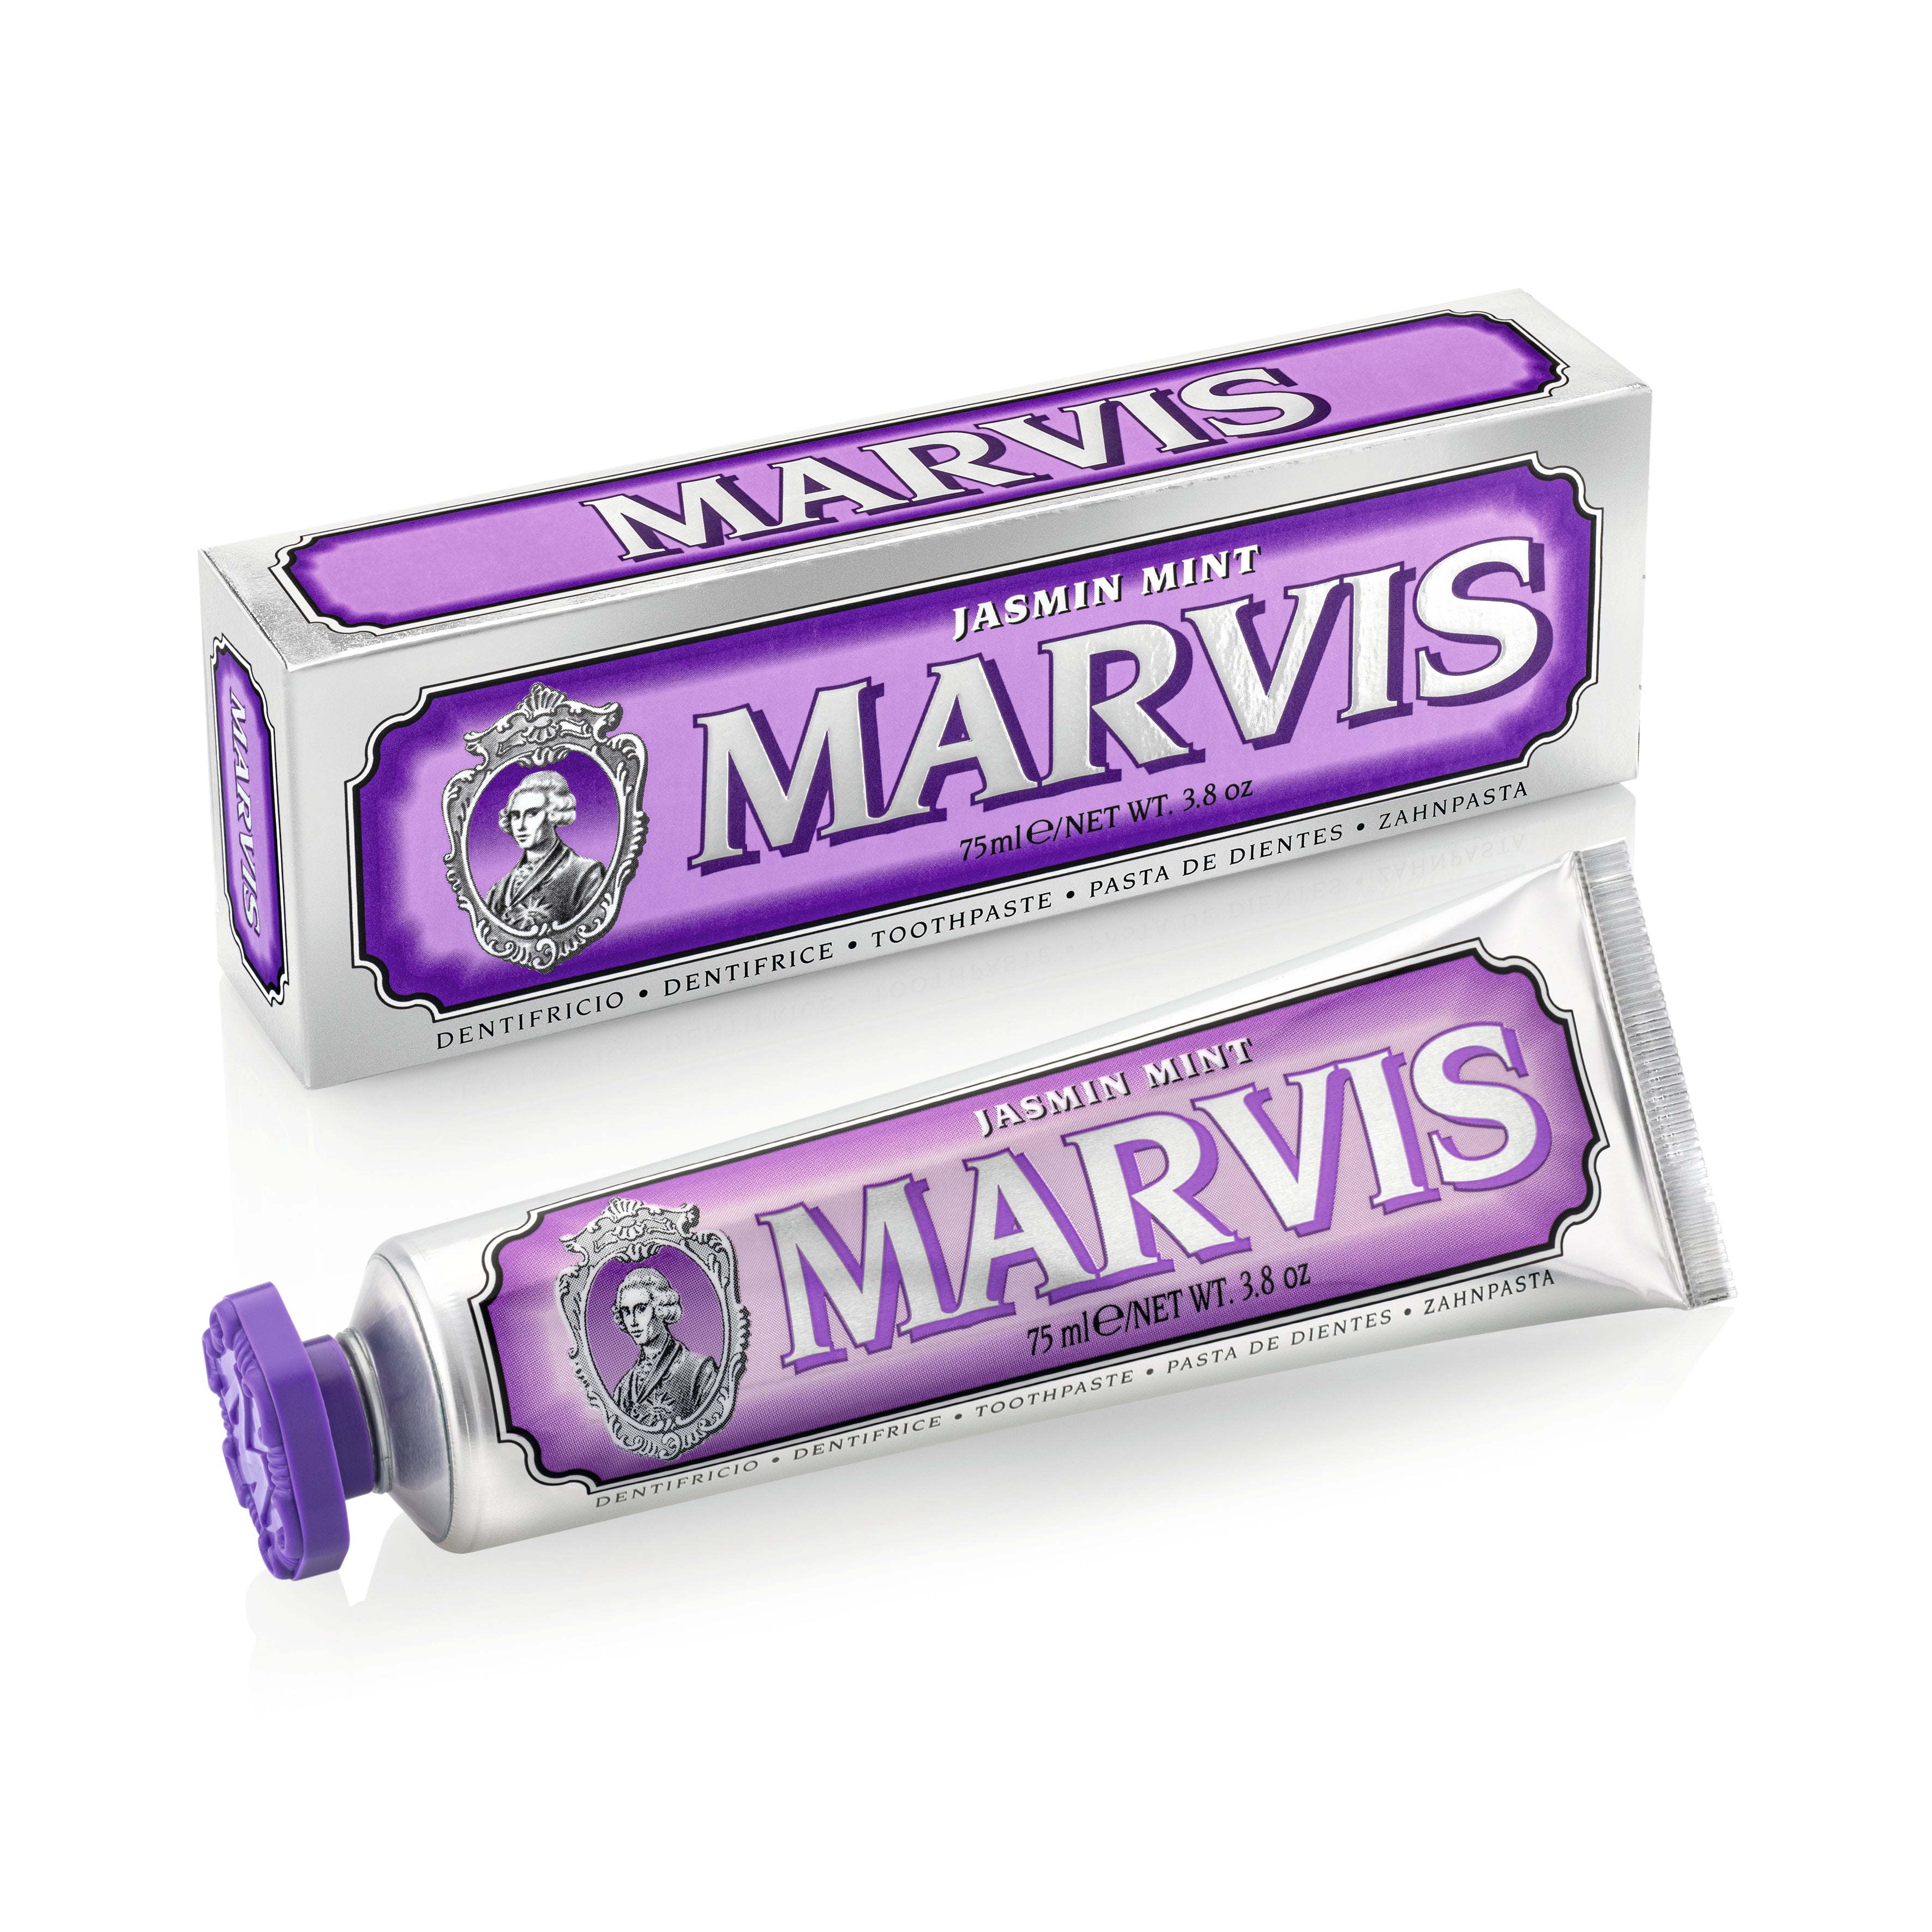 MARVIS Flavor with Holder ジャスミン・ミント - MARVIS